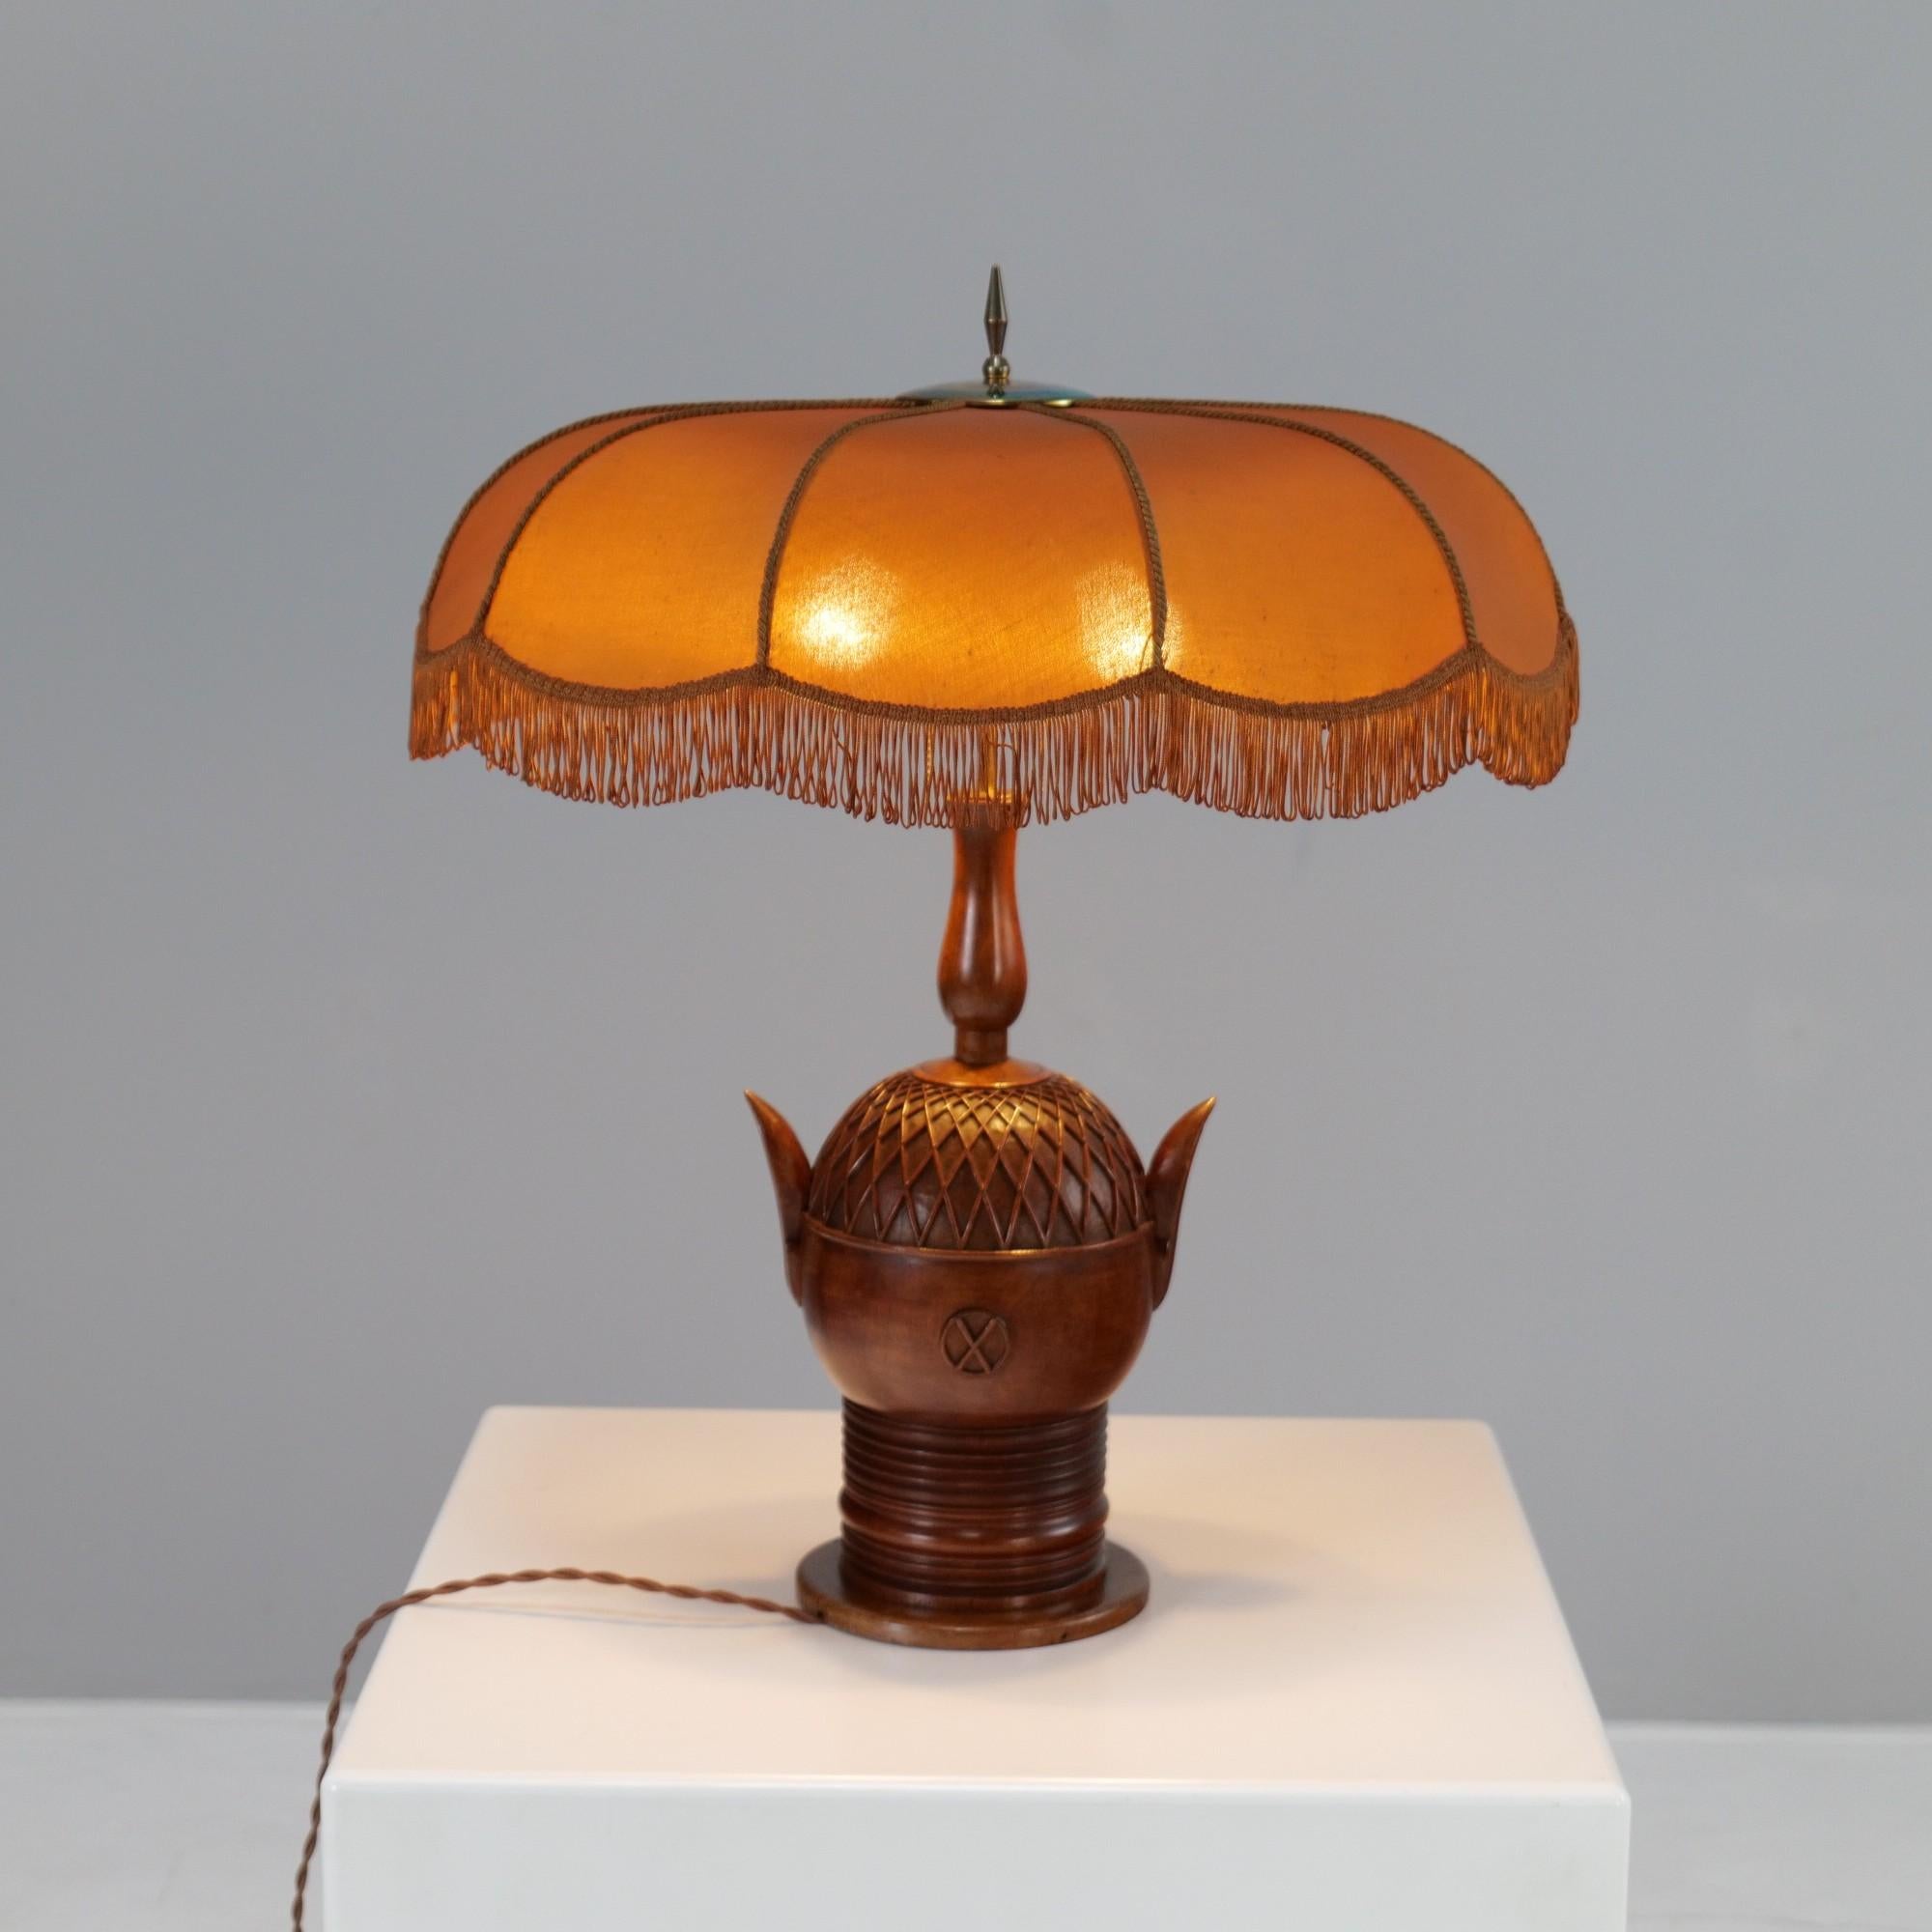 An extremely rare table lamp by Fritz August Breuhaus de Groot for Mikado Werkstätten A.-G. Bonn.
The lamp stem is turned and carved from walnut.
Fritz August Breuhaus de Groot was probably inspired by the Oba bronzes from Benin exhibited in the